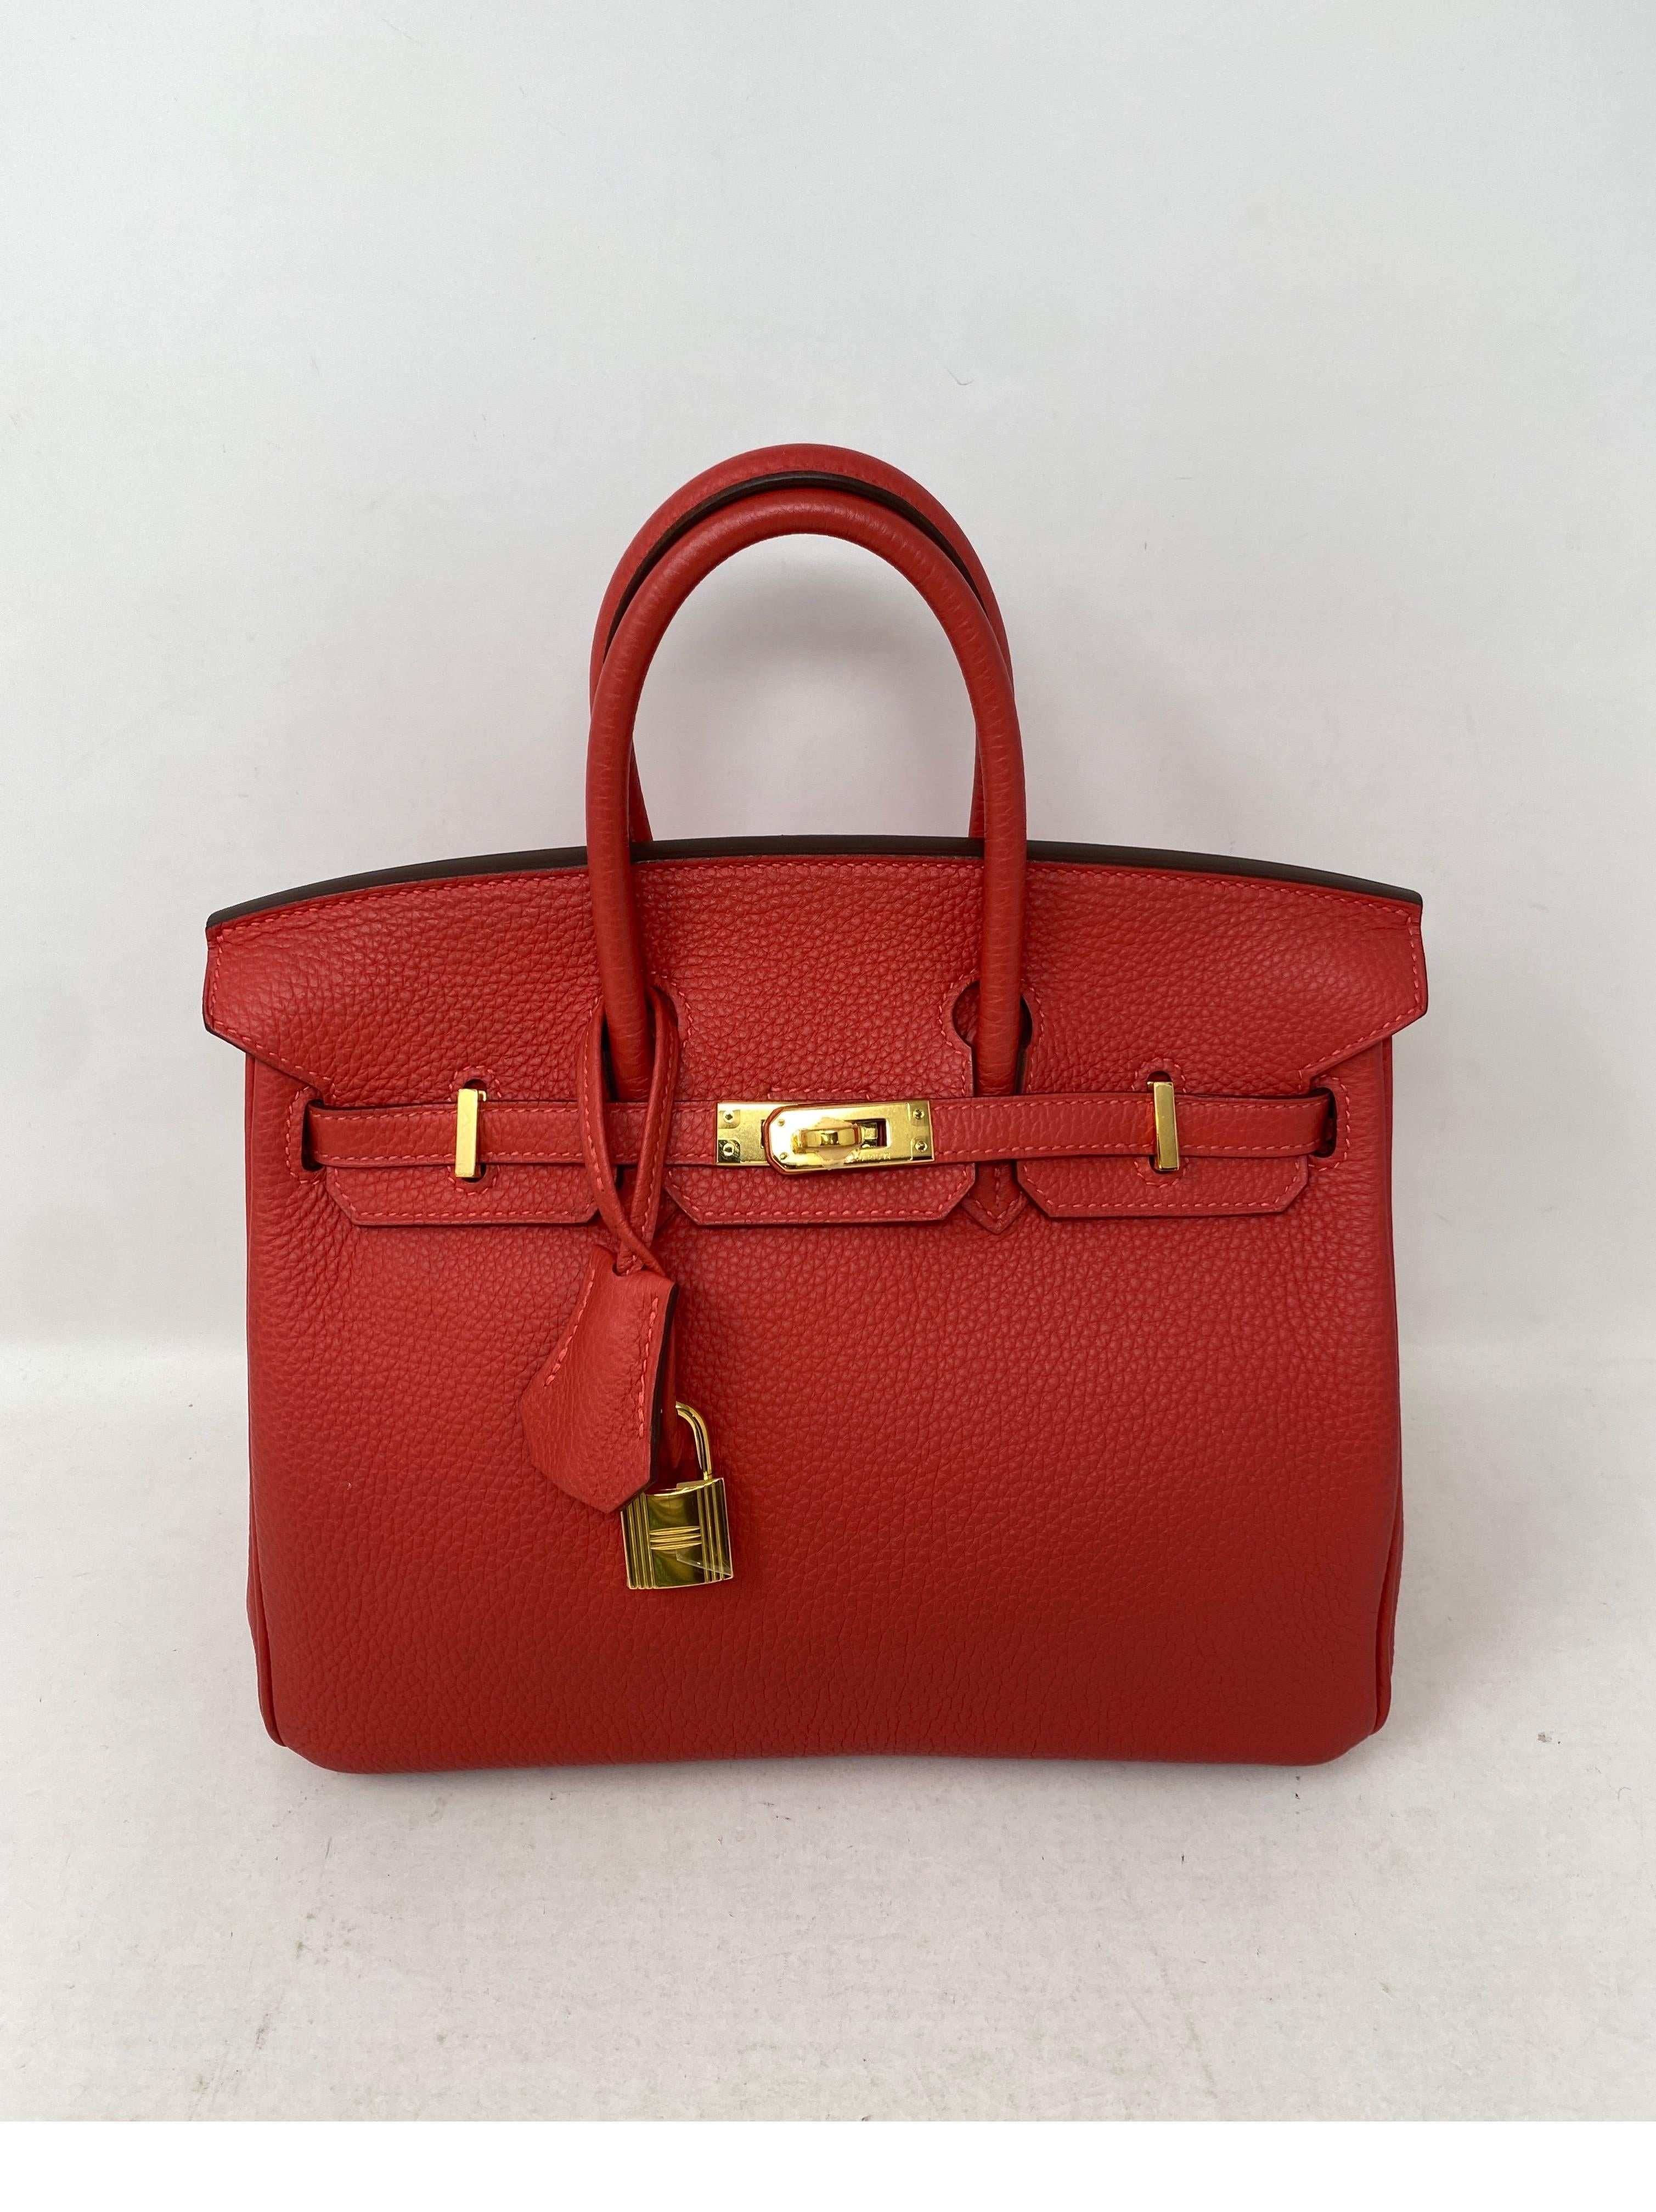 Hermes Birkin 25 Rouge Pivoine Bag. Excellent condition. Looks like new. Still has plastic on hardware. Rarest size mini 25 Birkin bag. Hard to find color. Rouge Pivoine is a collector's dream bag. Beautiful red pink color. Gold hardware. Great